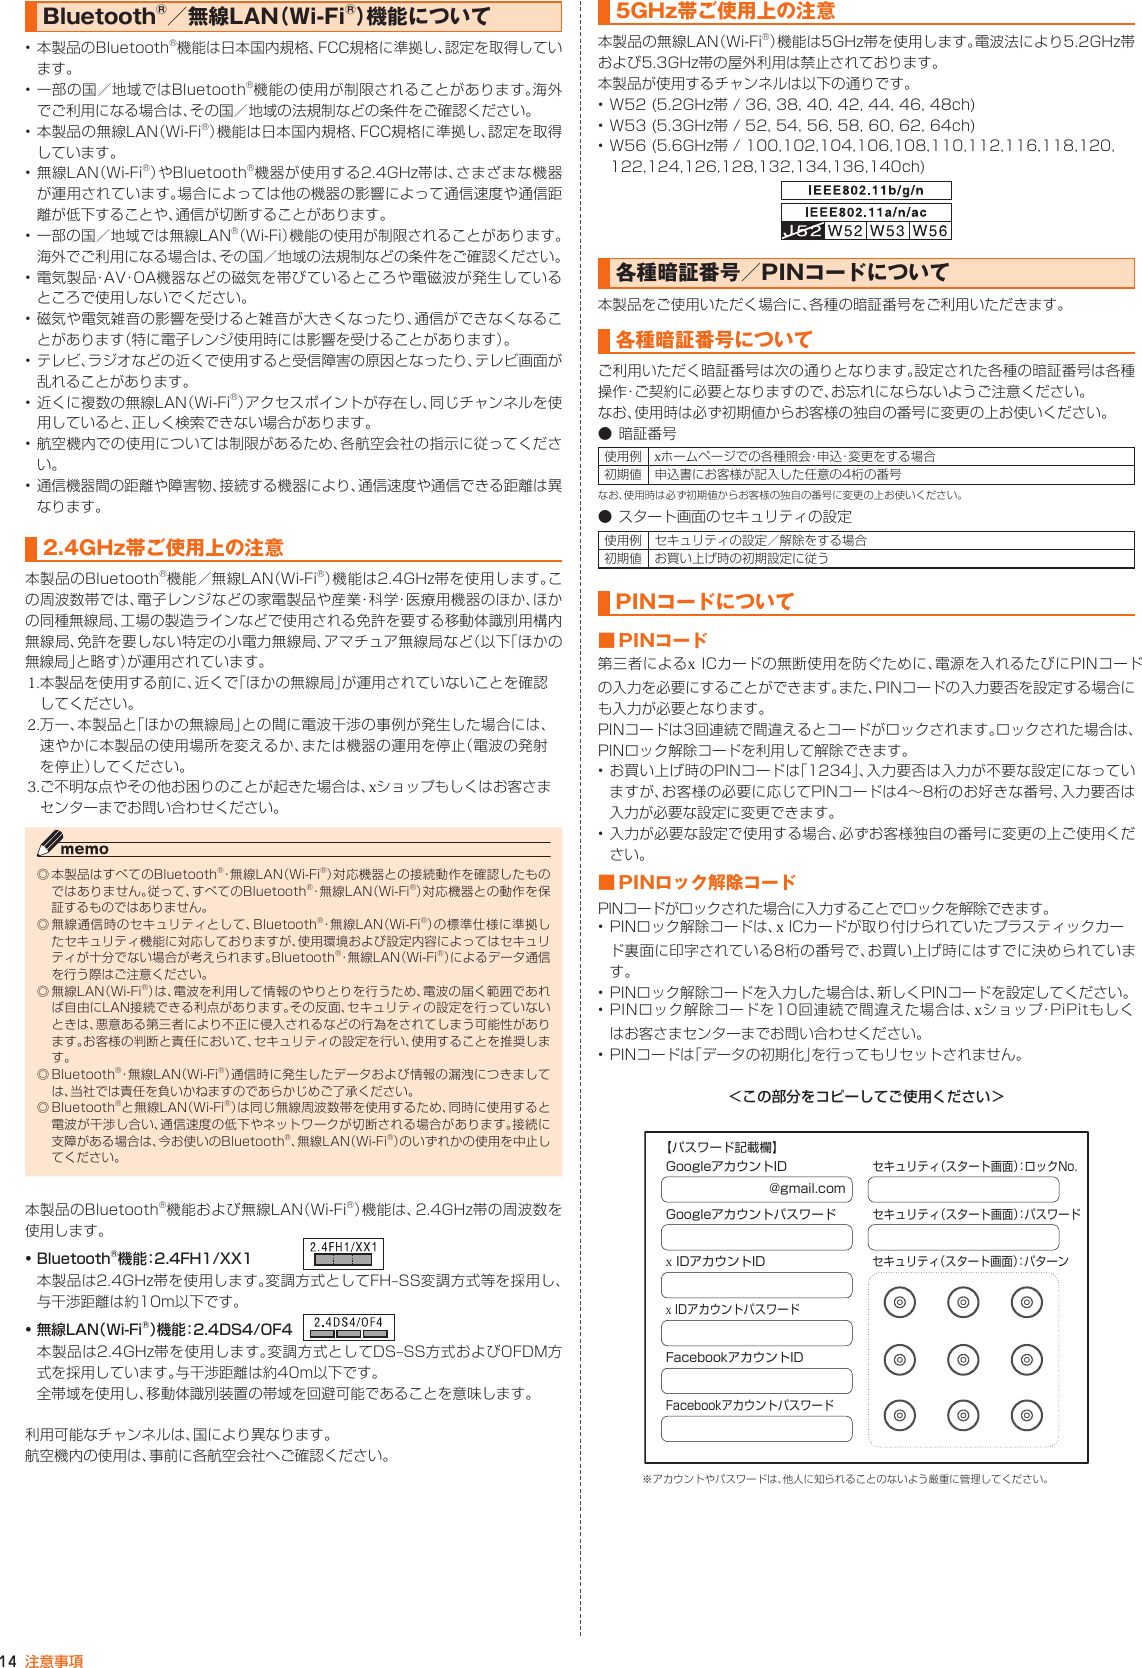 Page 14 of Kyocera FA51 Tablet User Manual part 2